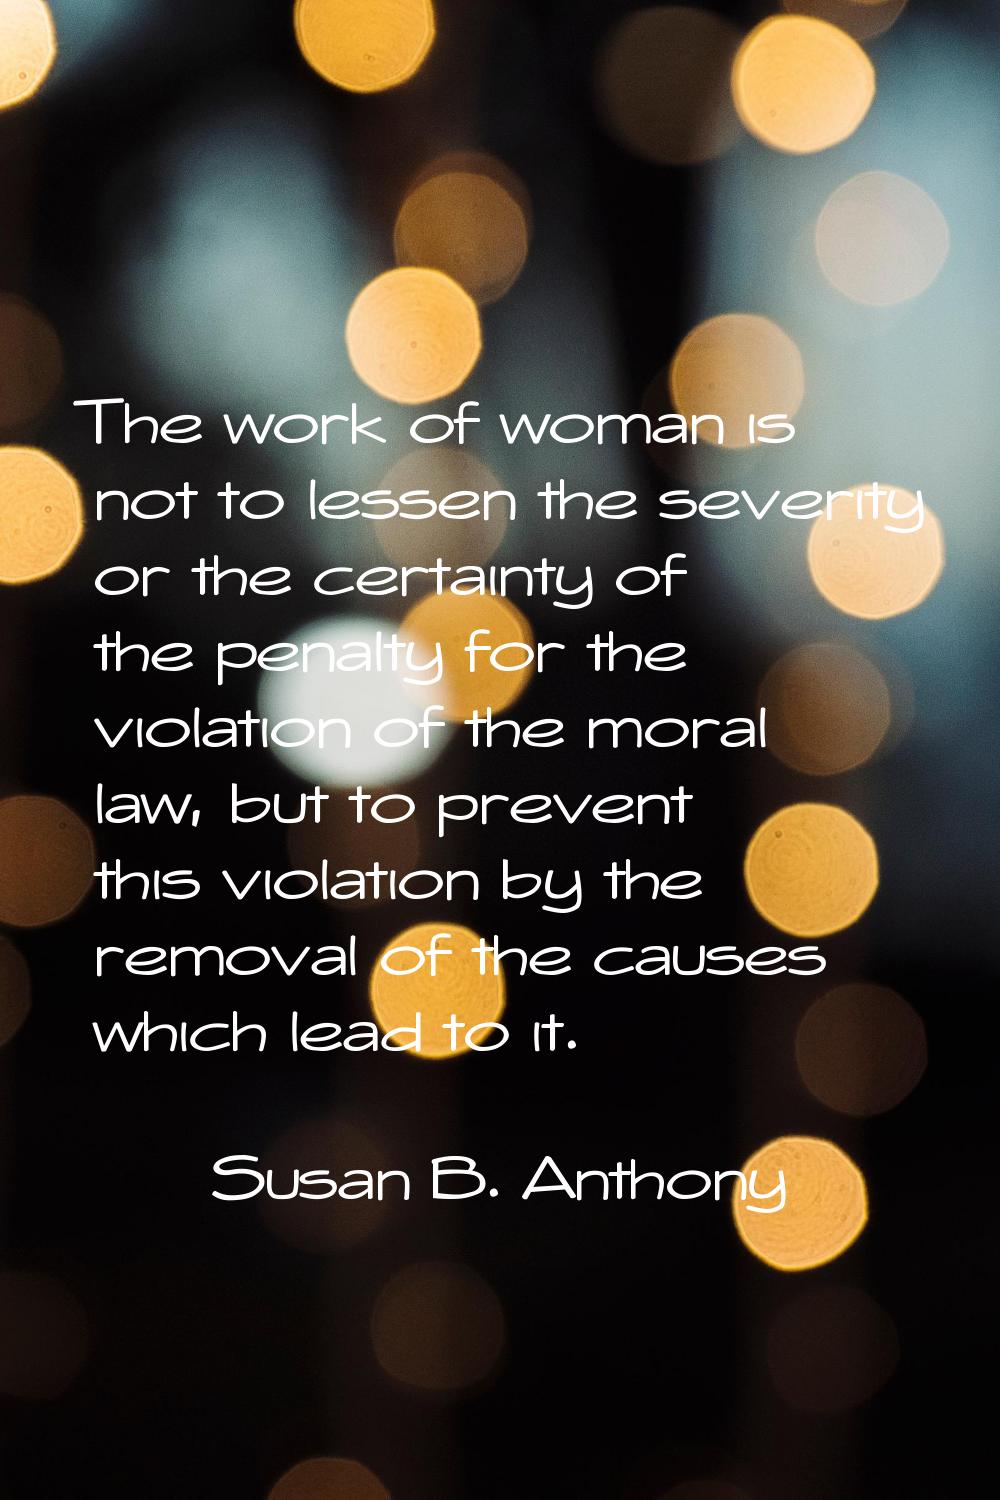 The work of woman is not to lessen the severity or the certainty of the penalty for the violation o